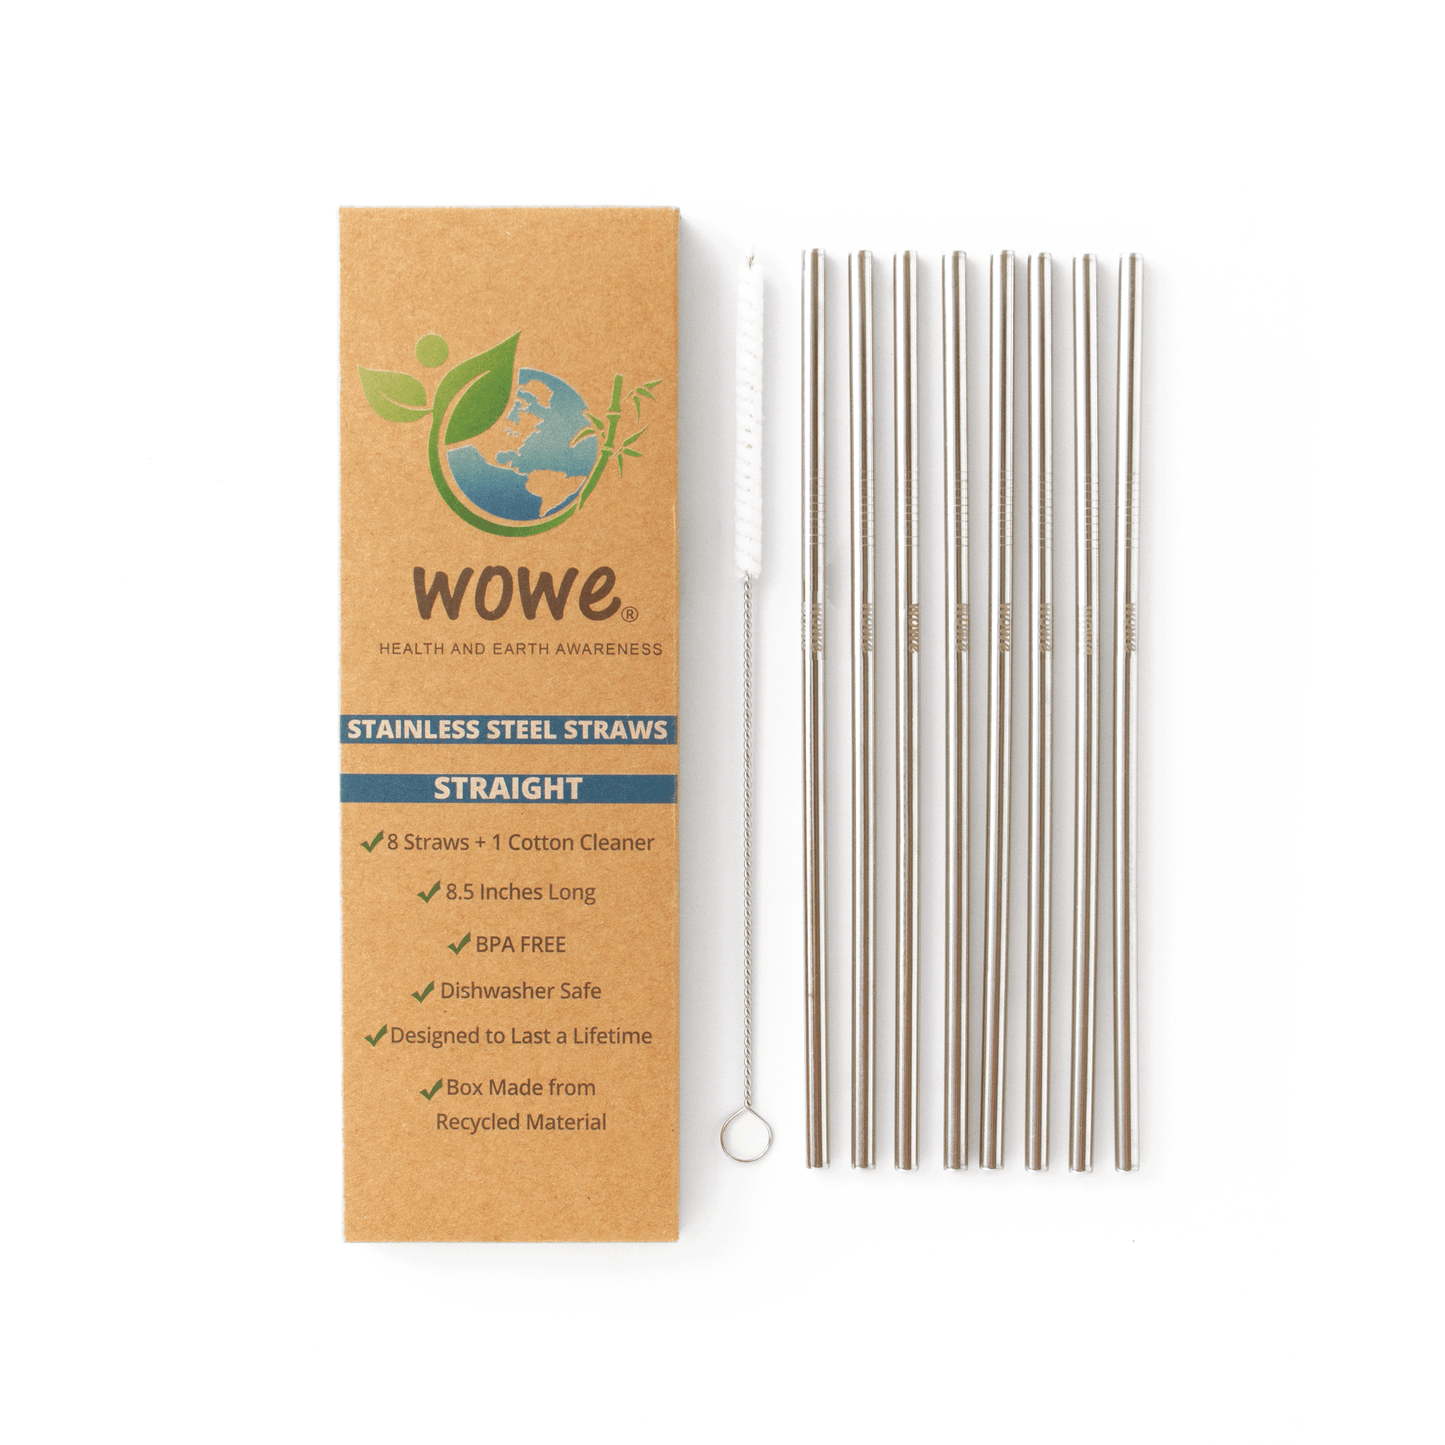 Straight Stainless Steel Straws - Pack of 8